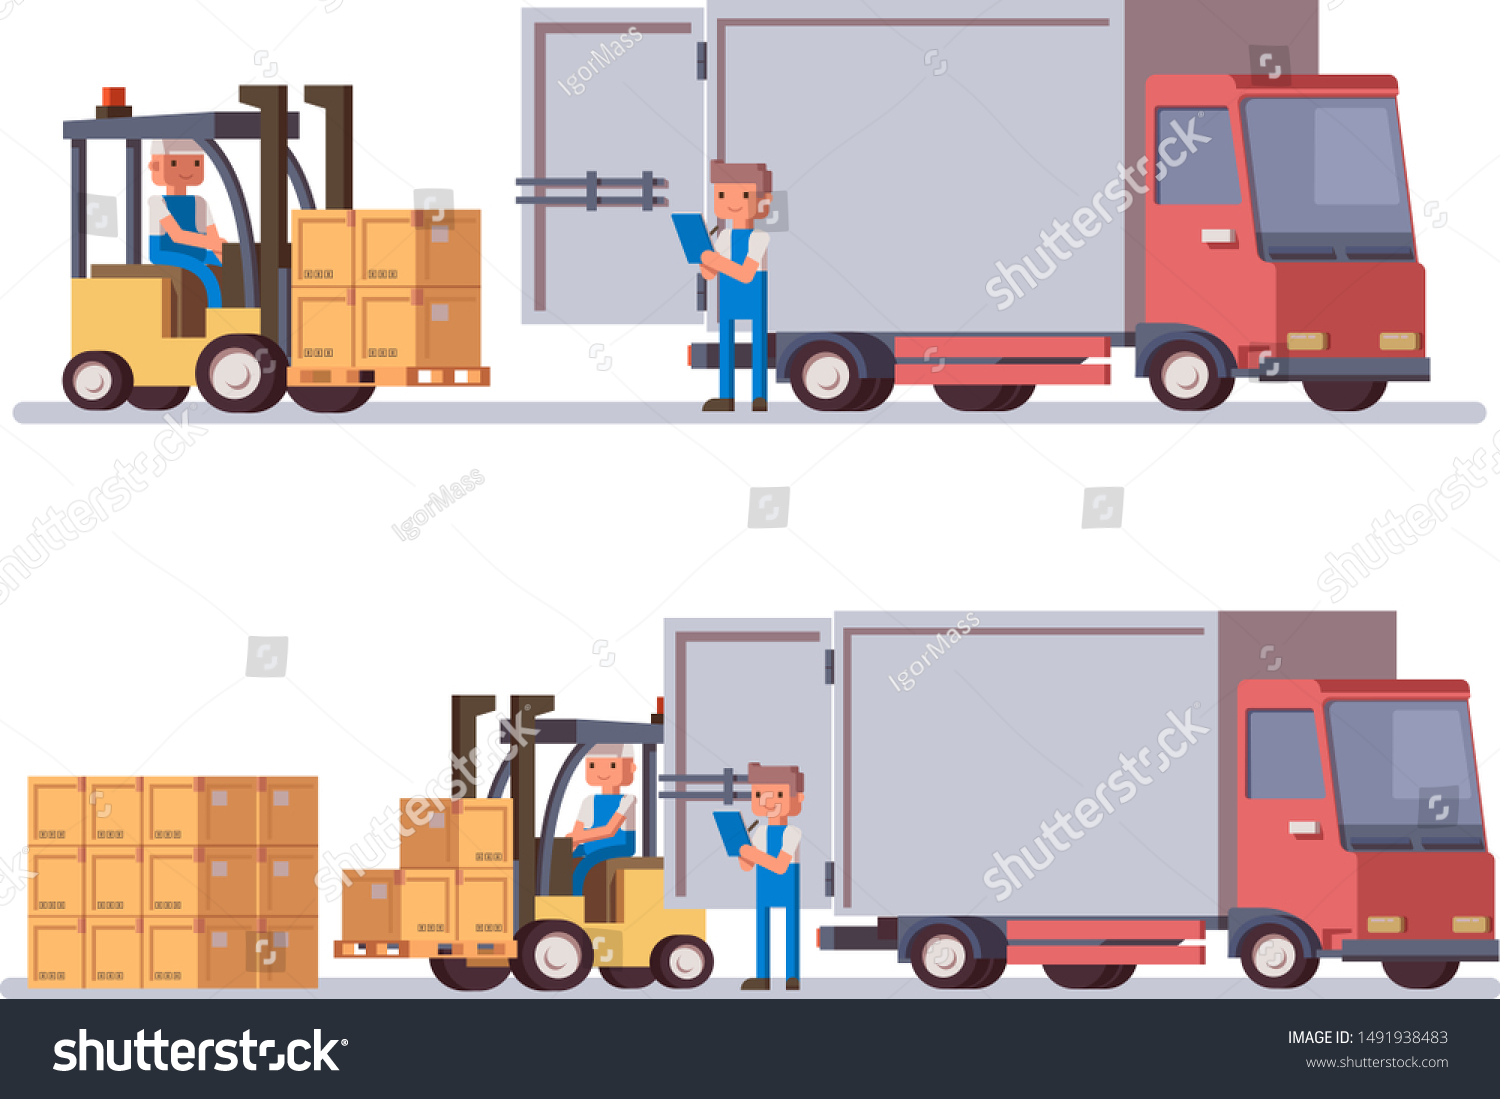 Flat Vector Delivery Truck Forklift Loading Stock Vector Royalty Free 1491938483